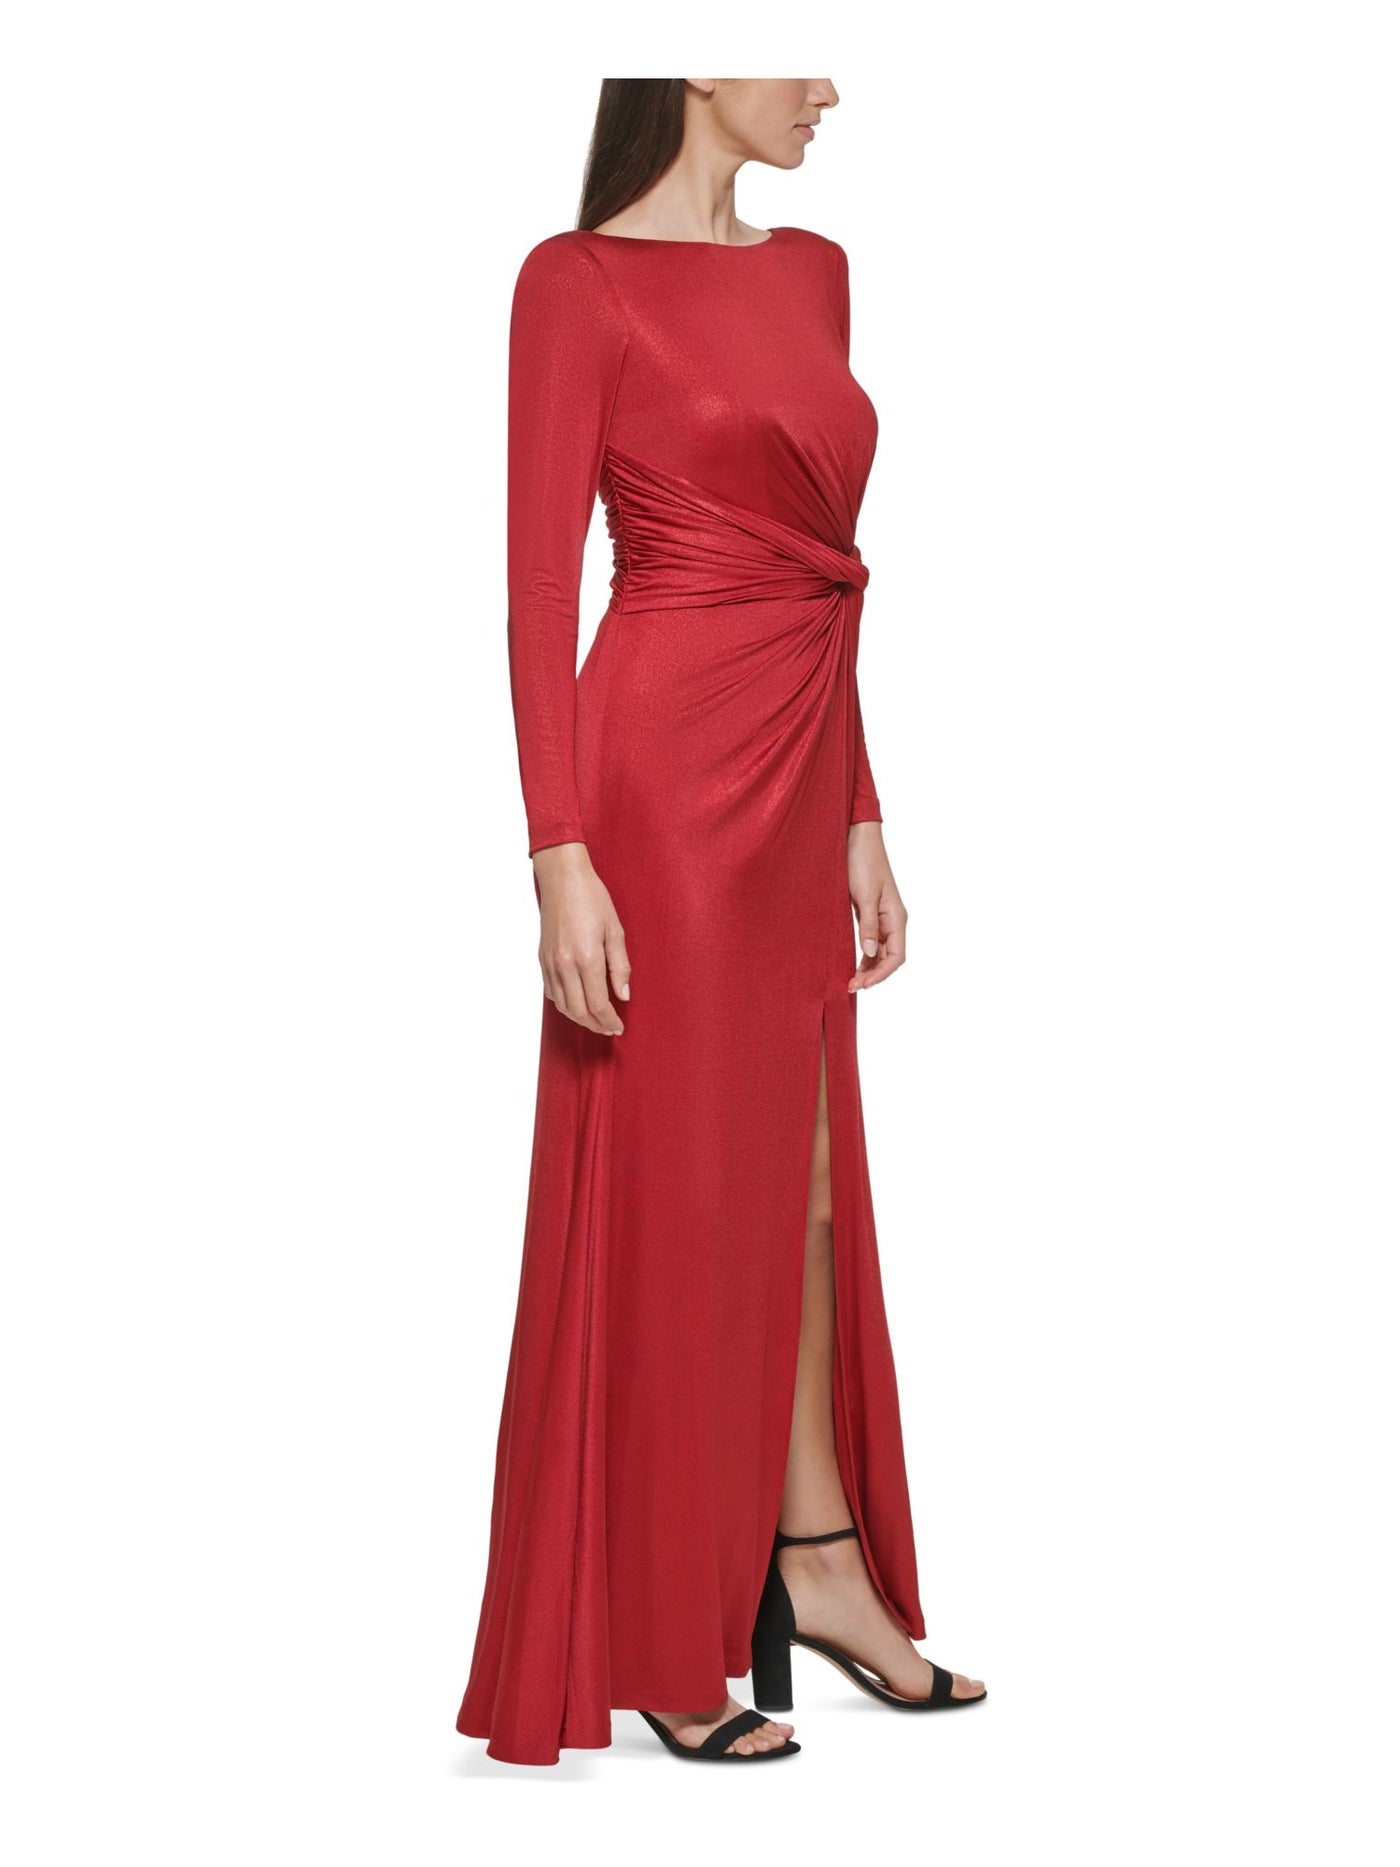 VINCE CAMUTO Womens Red Metallic Gathered Zippered Slitted Long Sleeve Boat Neck Full-Length Evening Gown Dress 14P